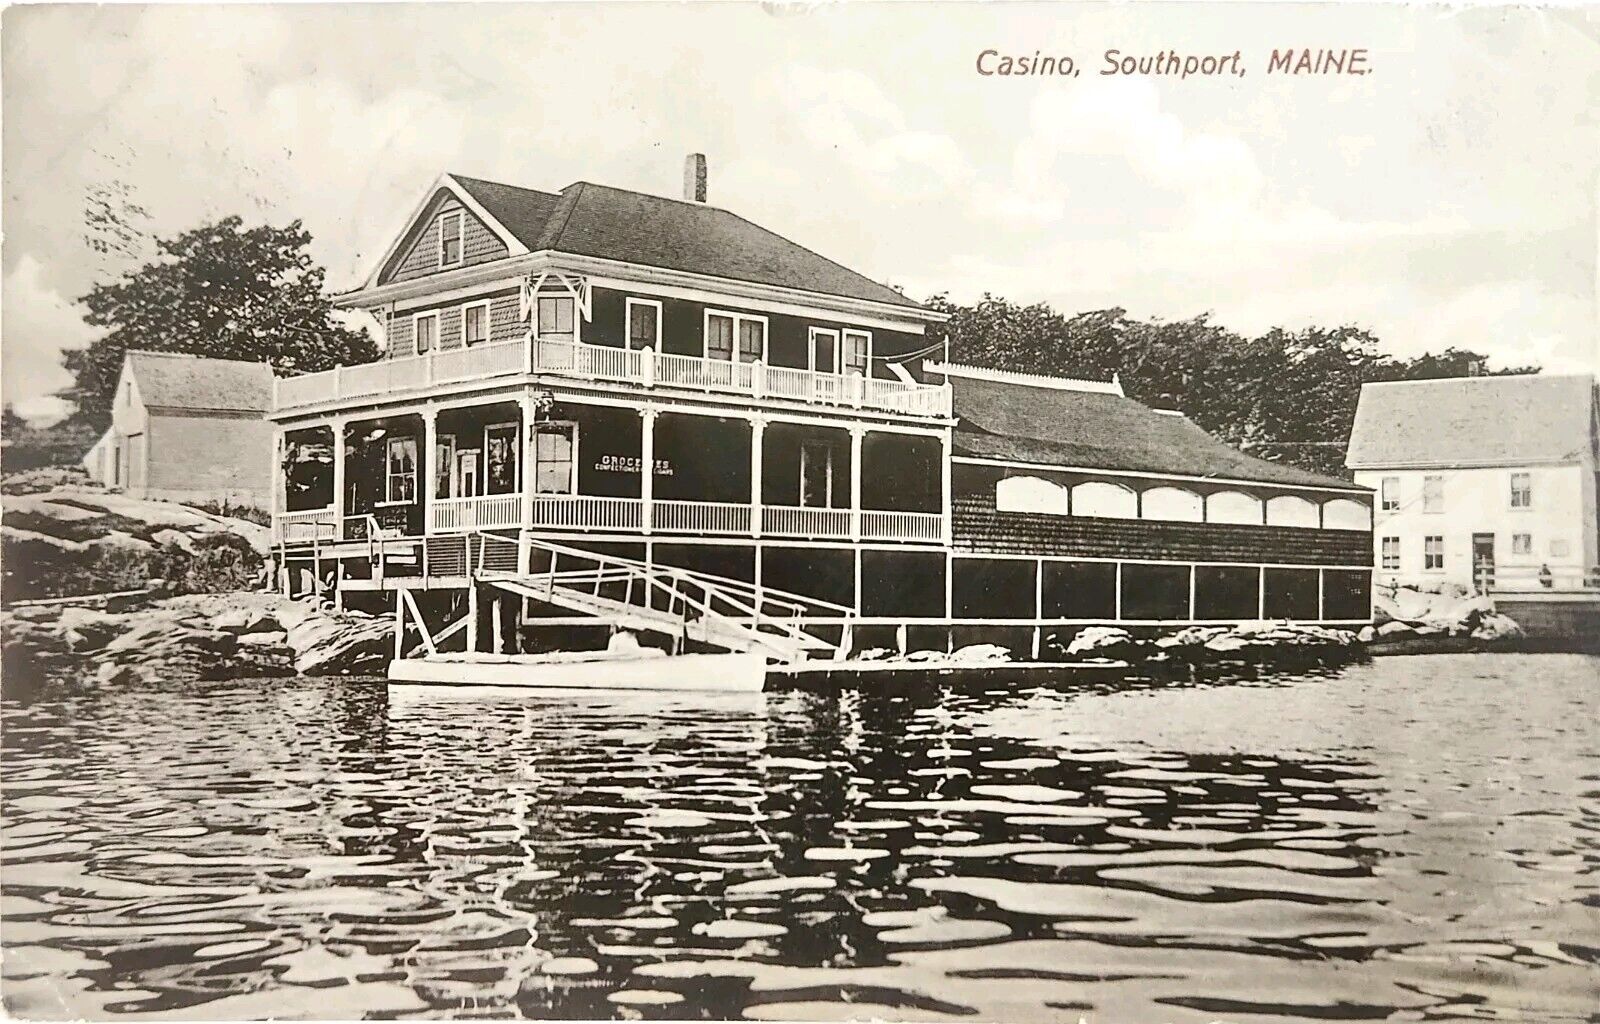 Postcard Southport Maine Casino On The Water A3 Vintage